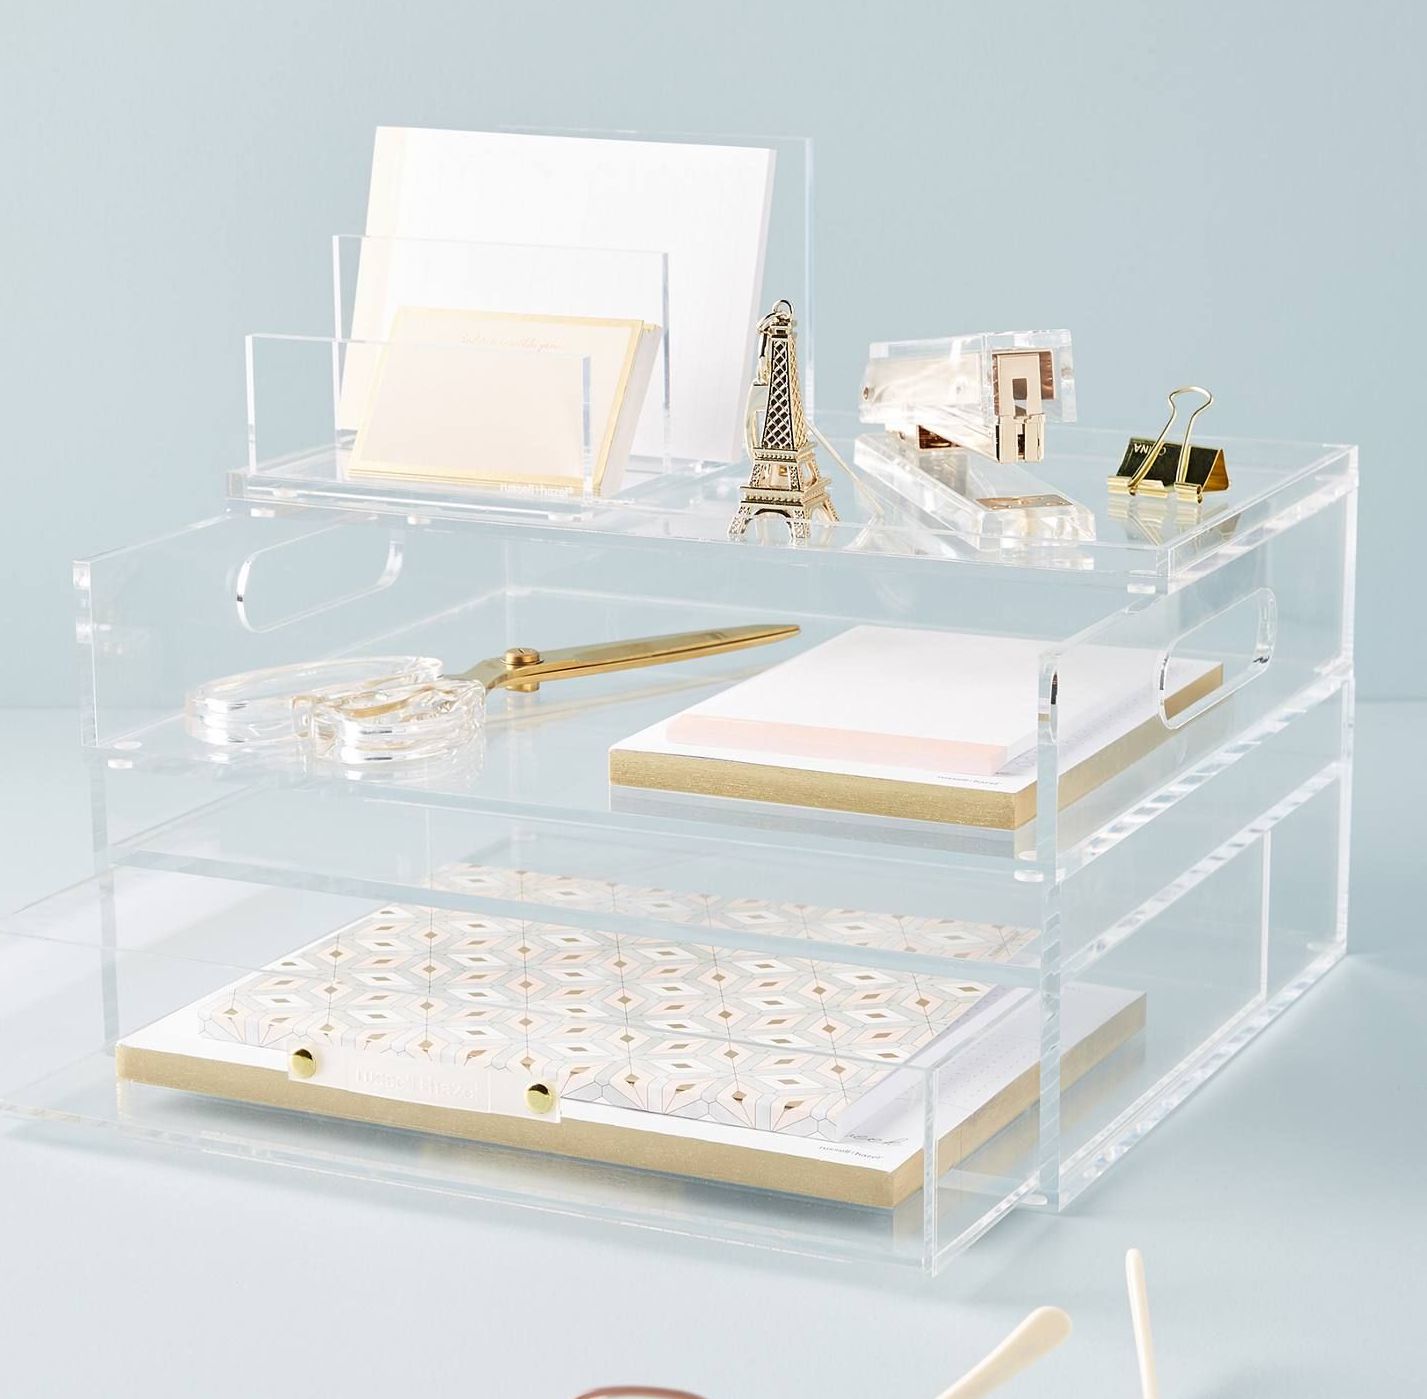 The top 20 cool desk accessories for creative professionals in